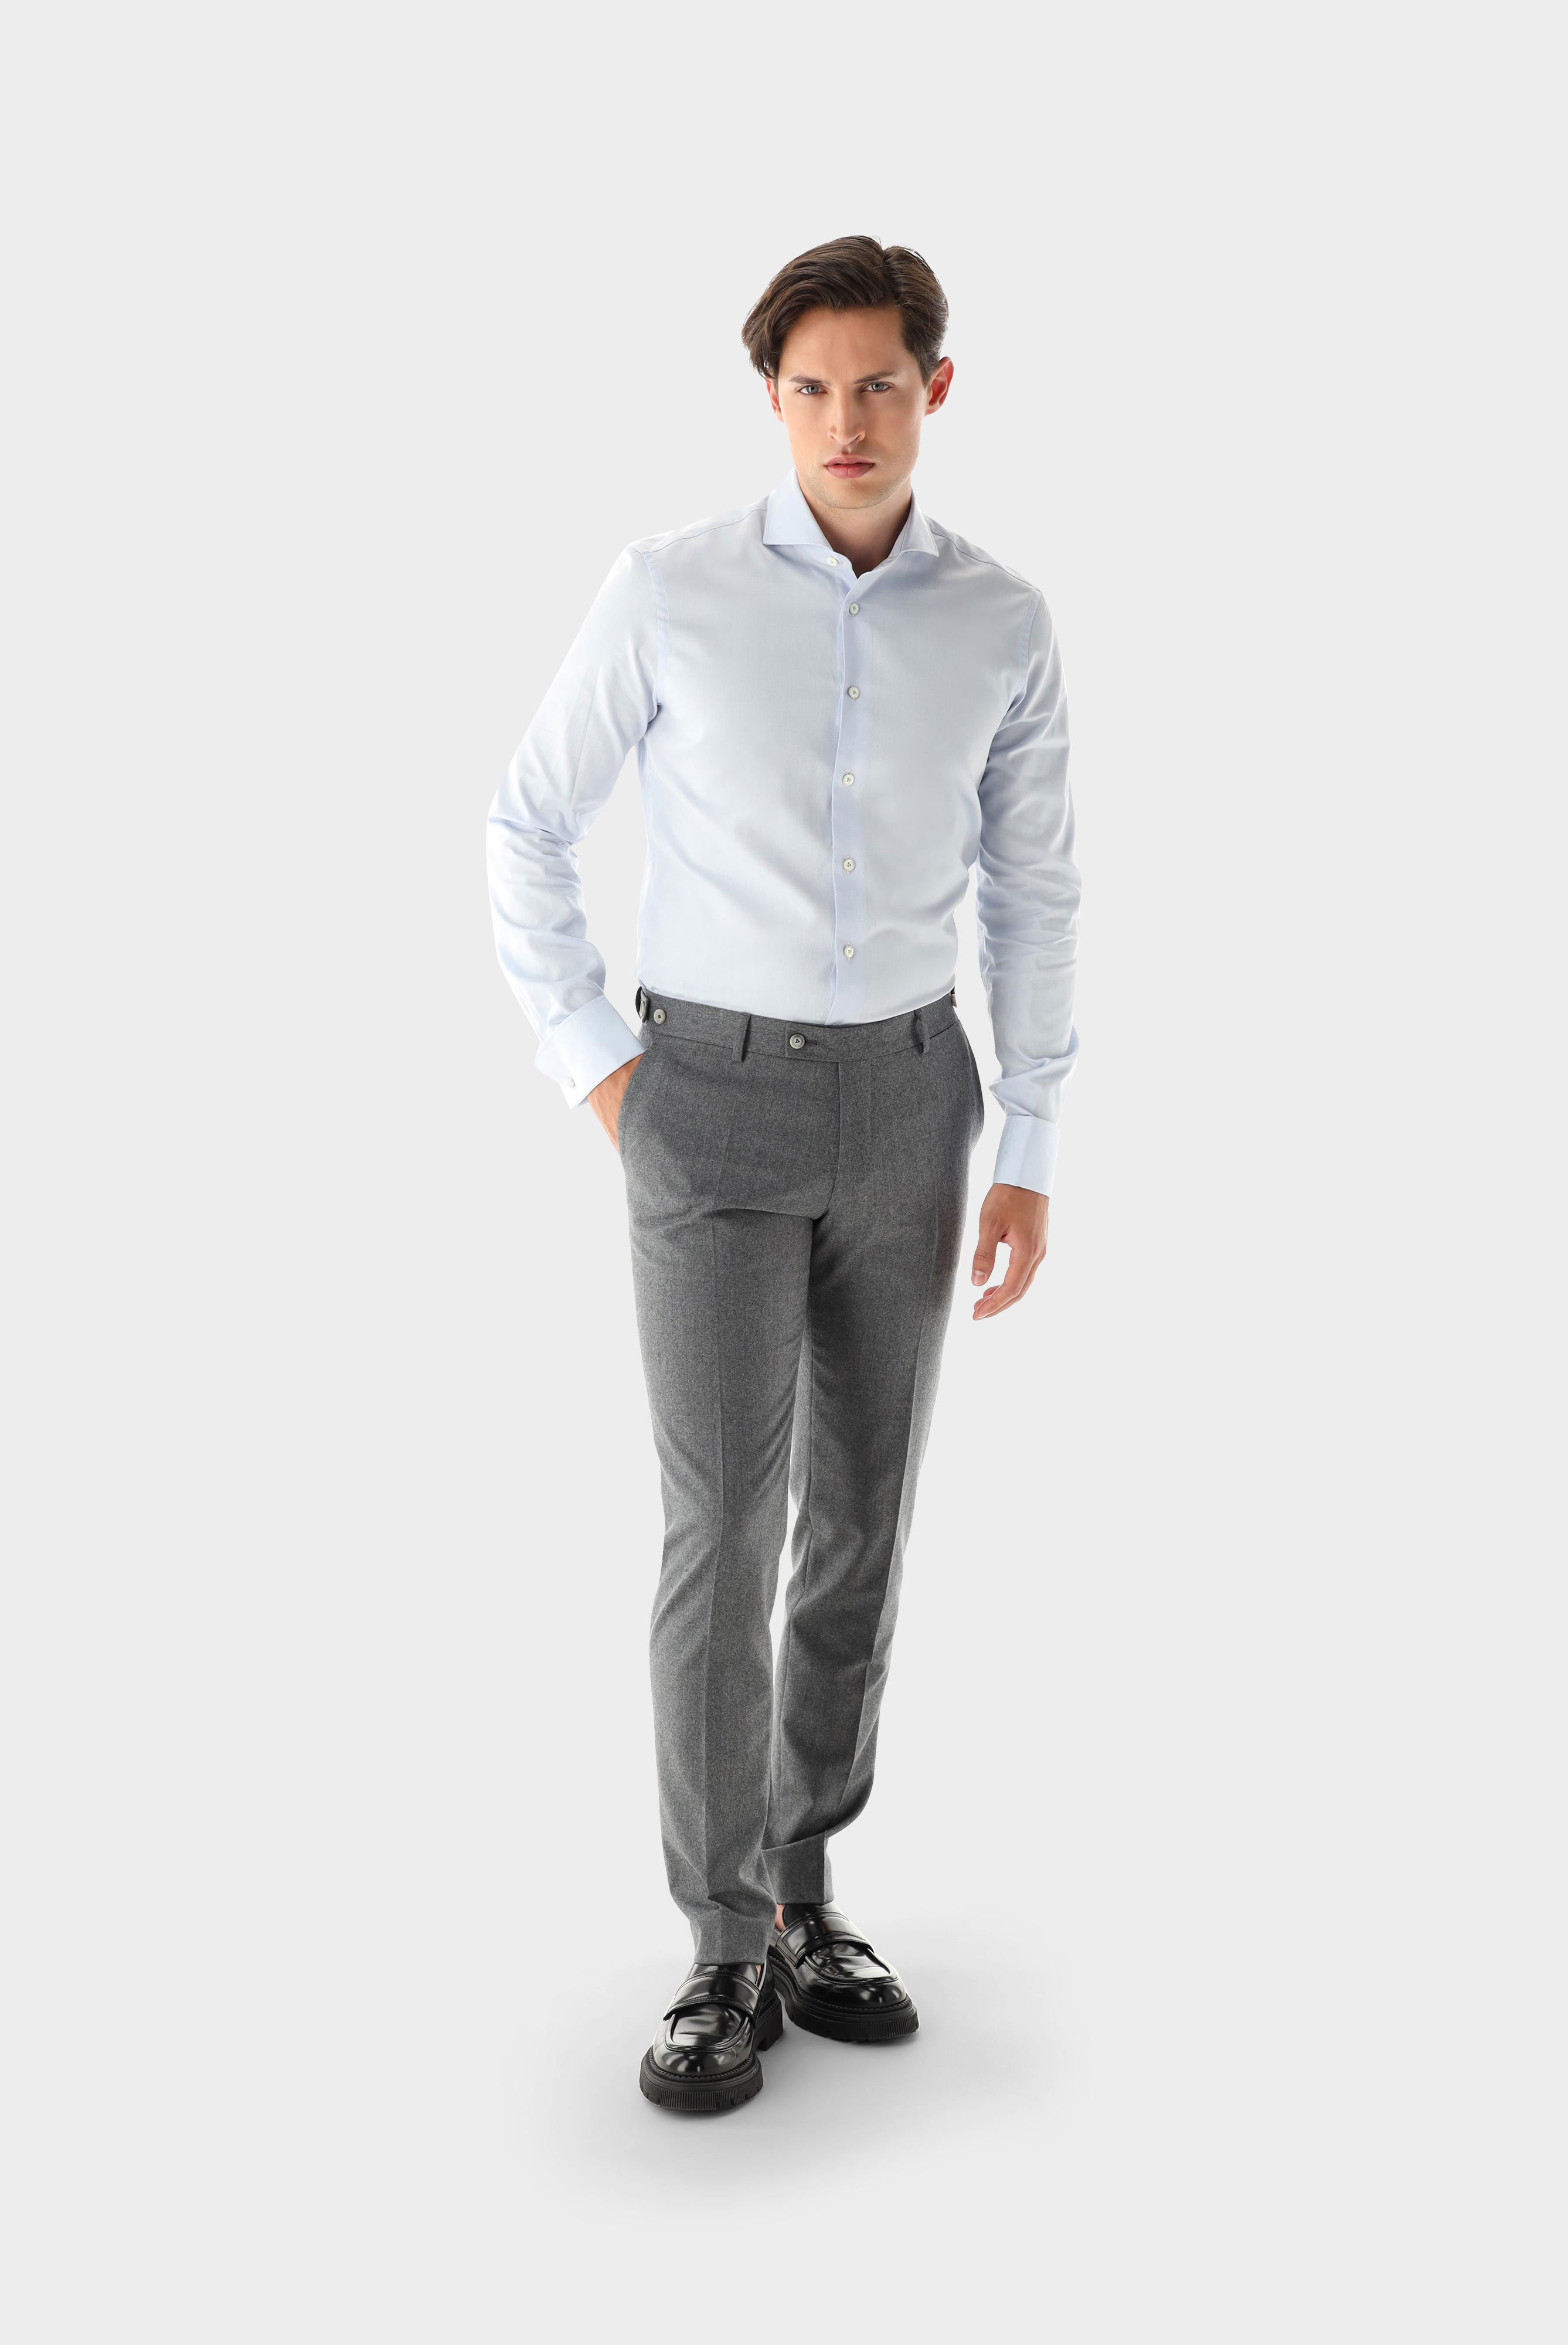 Shirt with Double Cuffs Tailor Fit